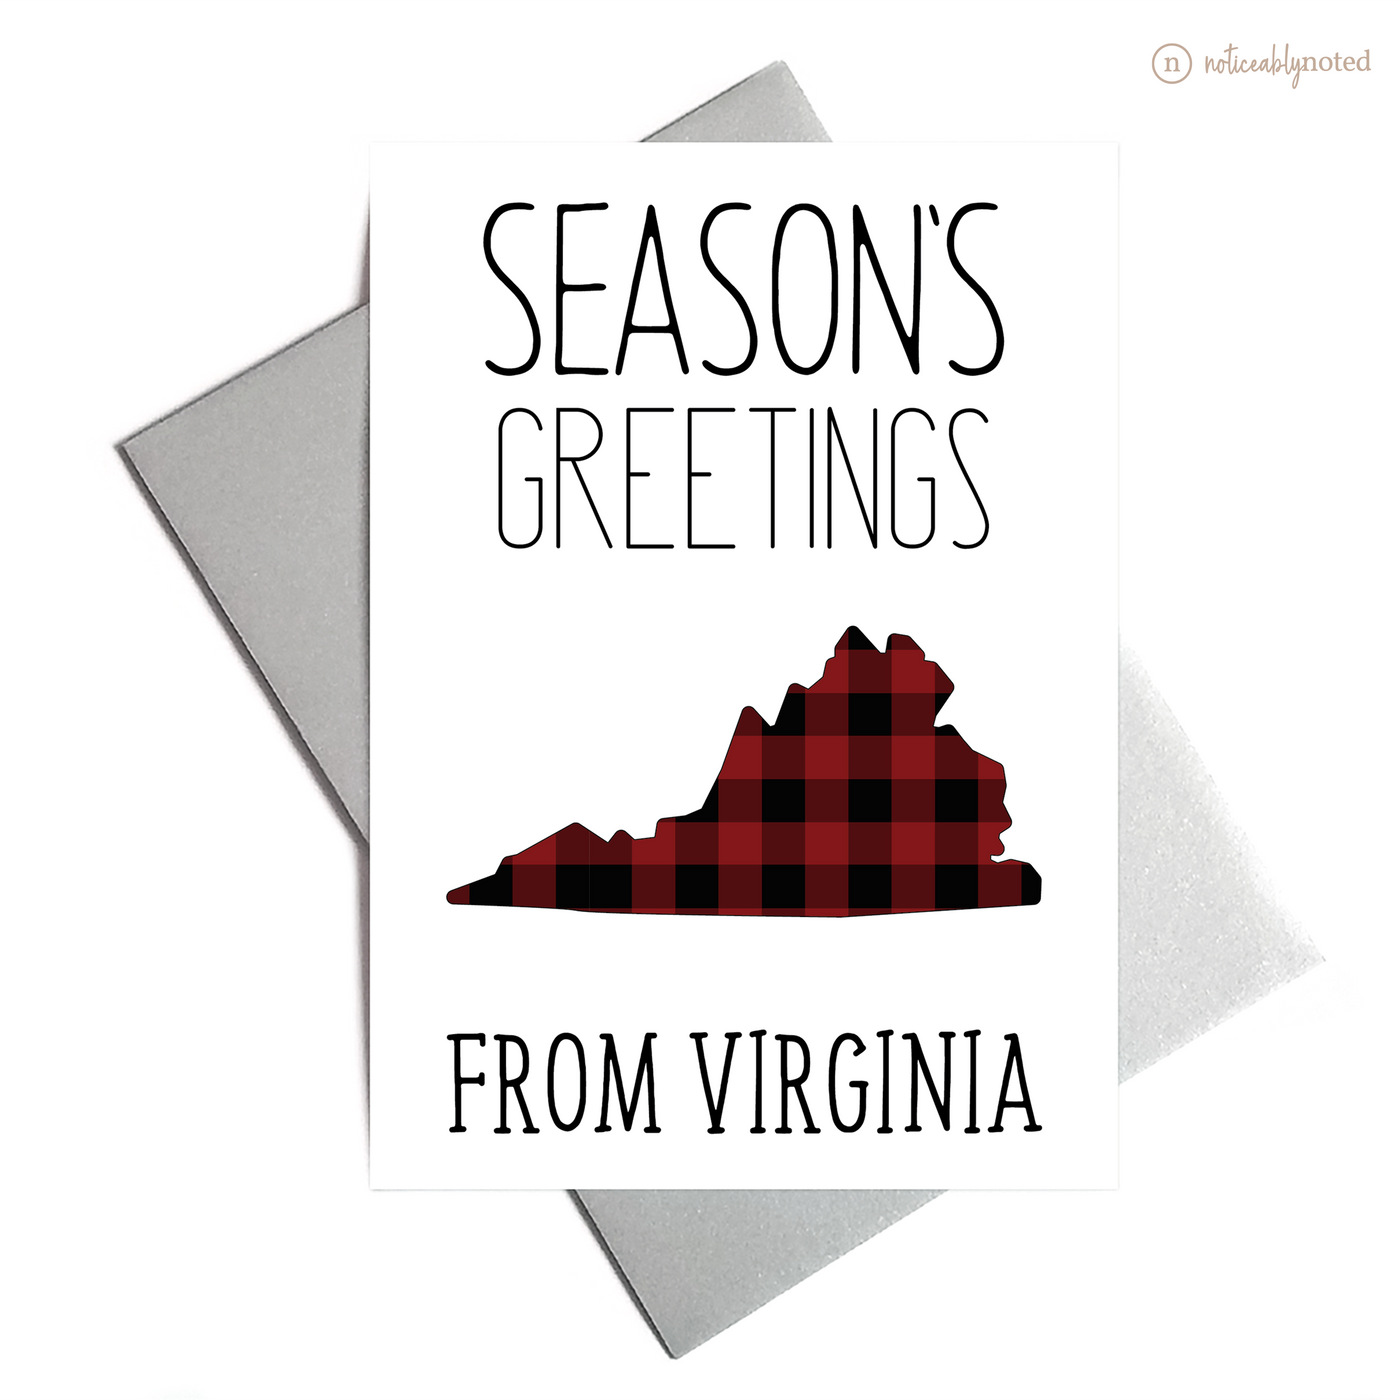 Virginia Holiday Card - Season's Greetings | Noticeably Noted